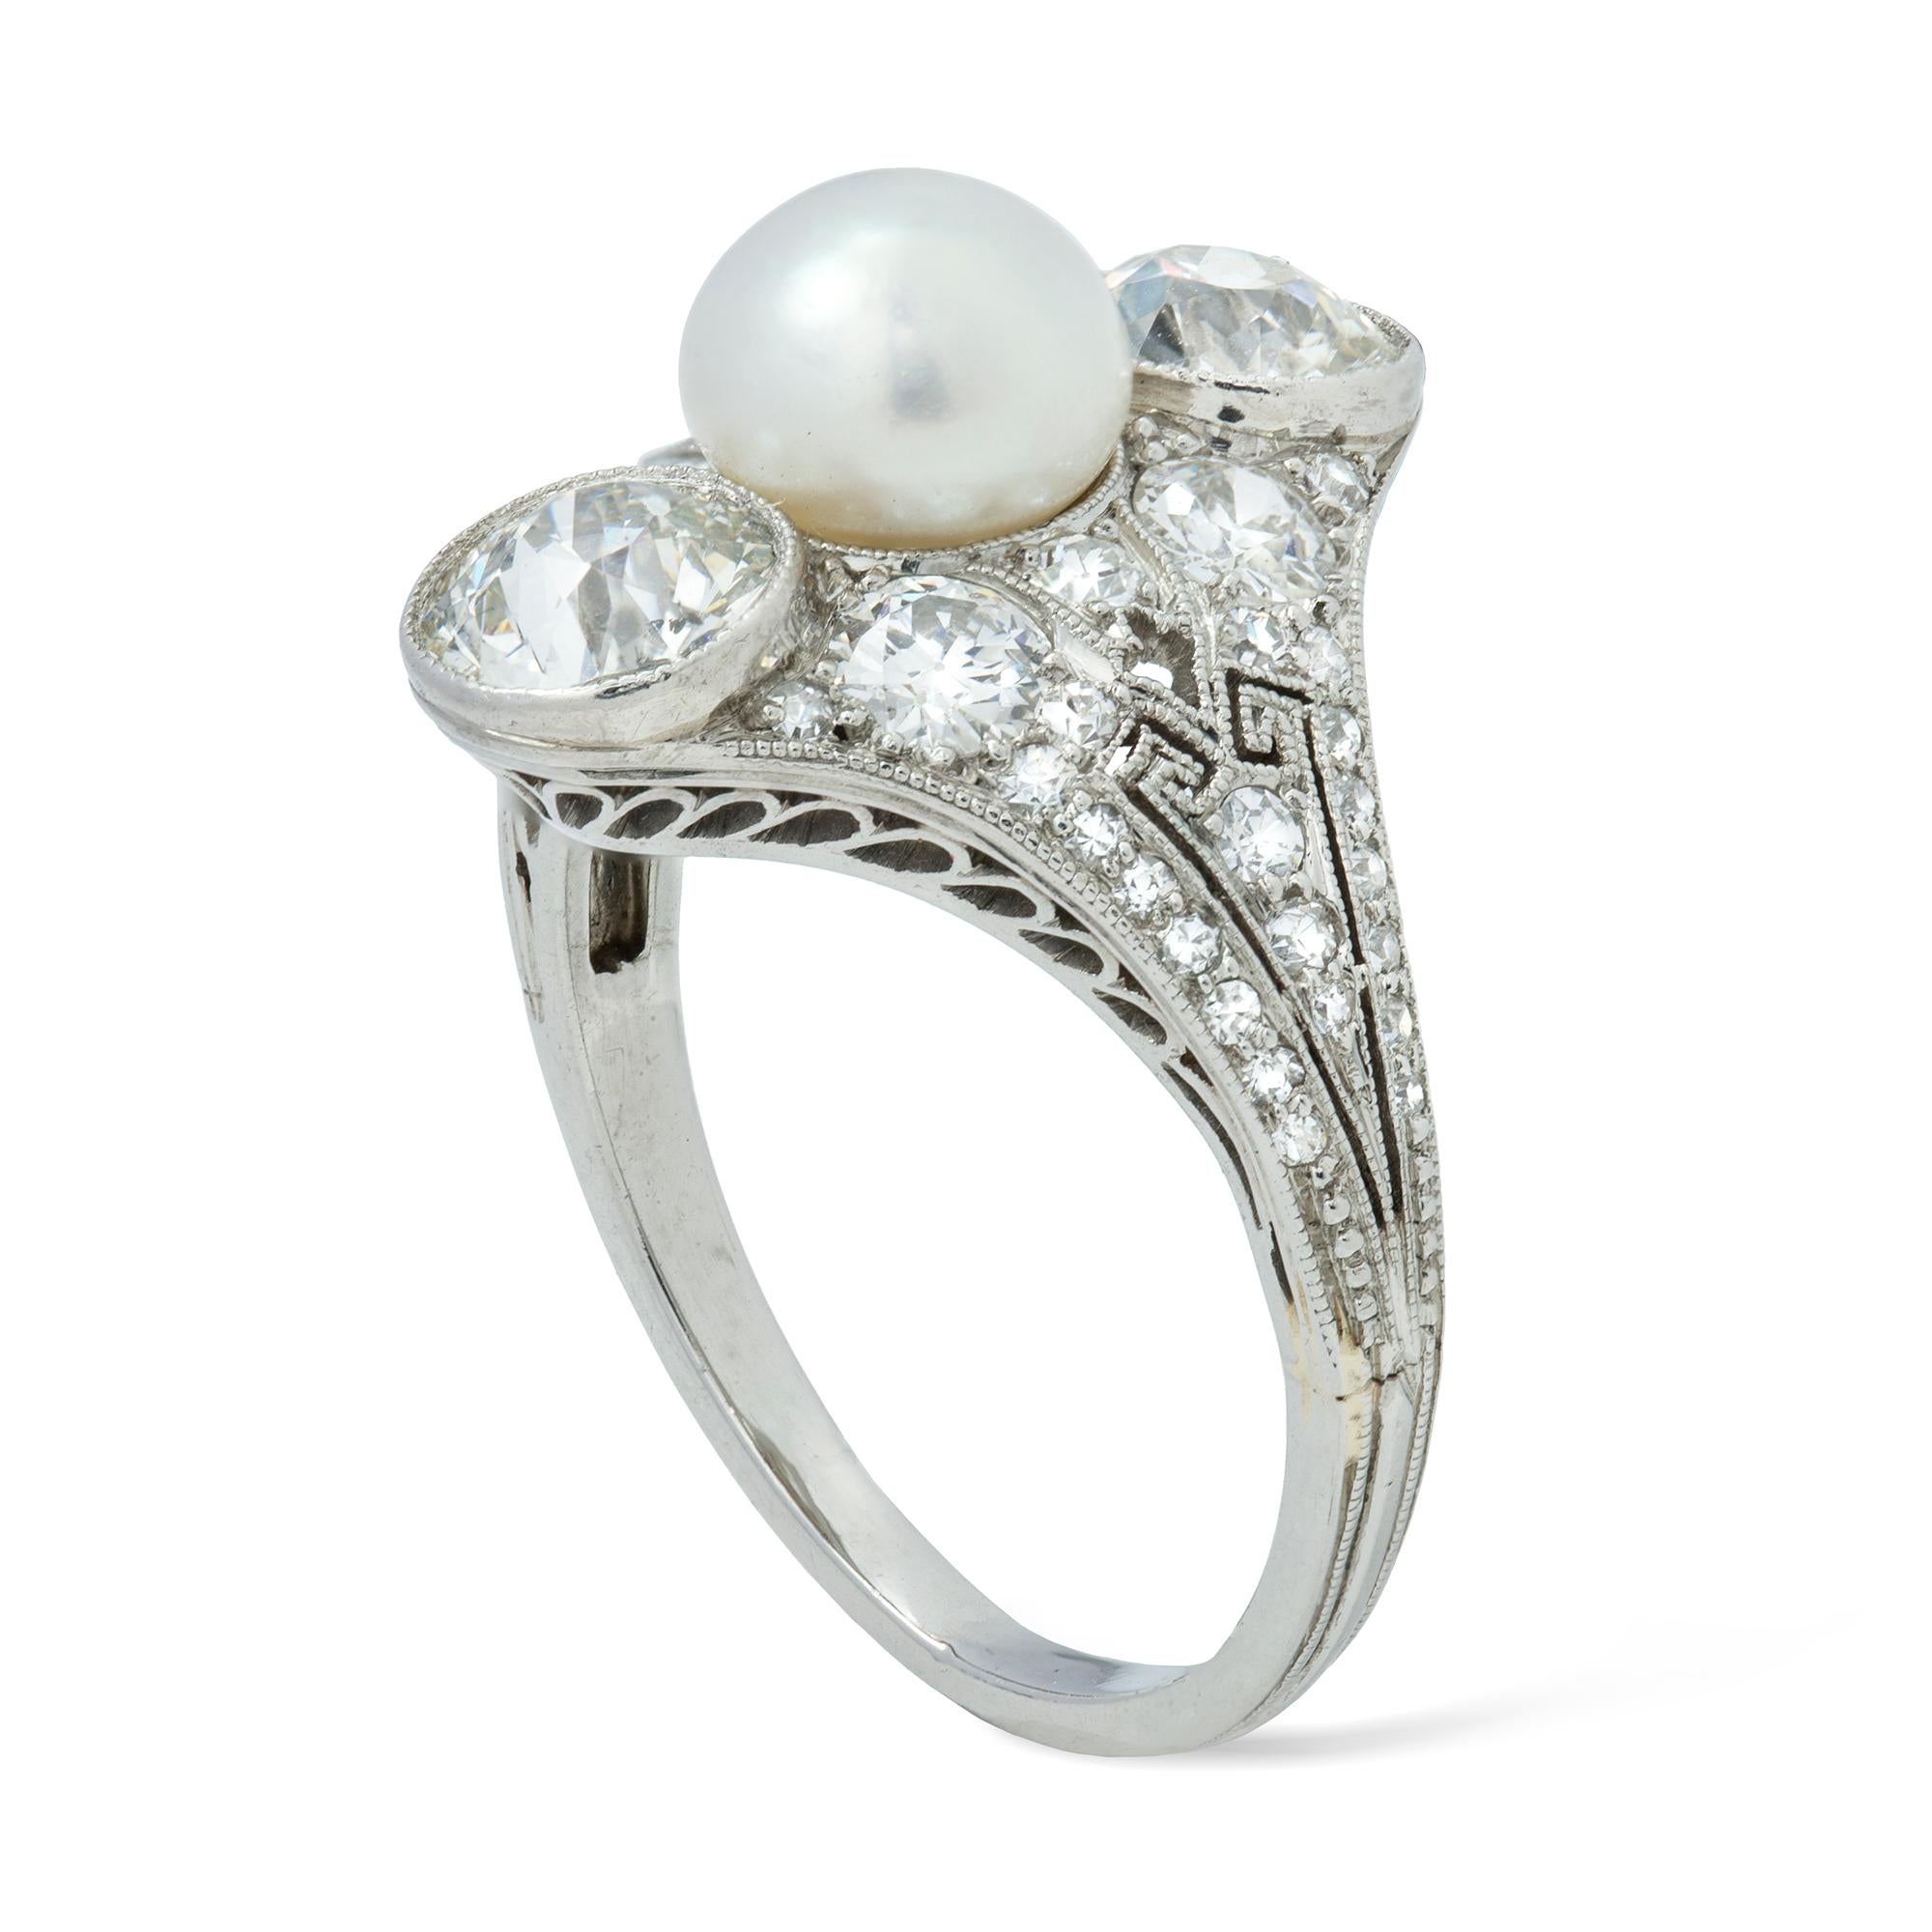 A Belle Époque natural pearl and diamond ring, the vertically set three stone pearl, accompanied by a Gem and Pearl Laboratory certificate stating the 1.95 carats pearl to be a natural saltwater, and two old brilliant-cut diamonds either side